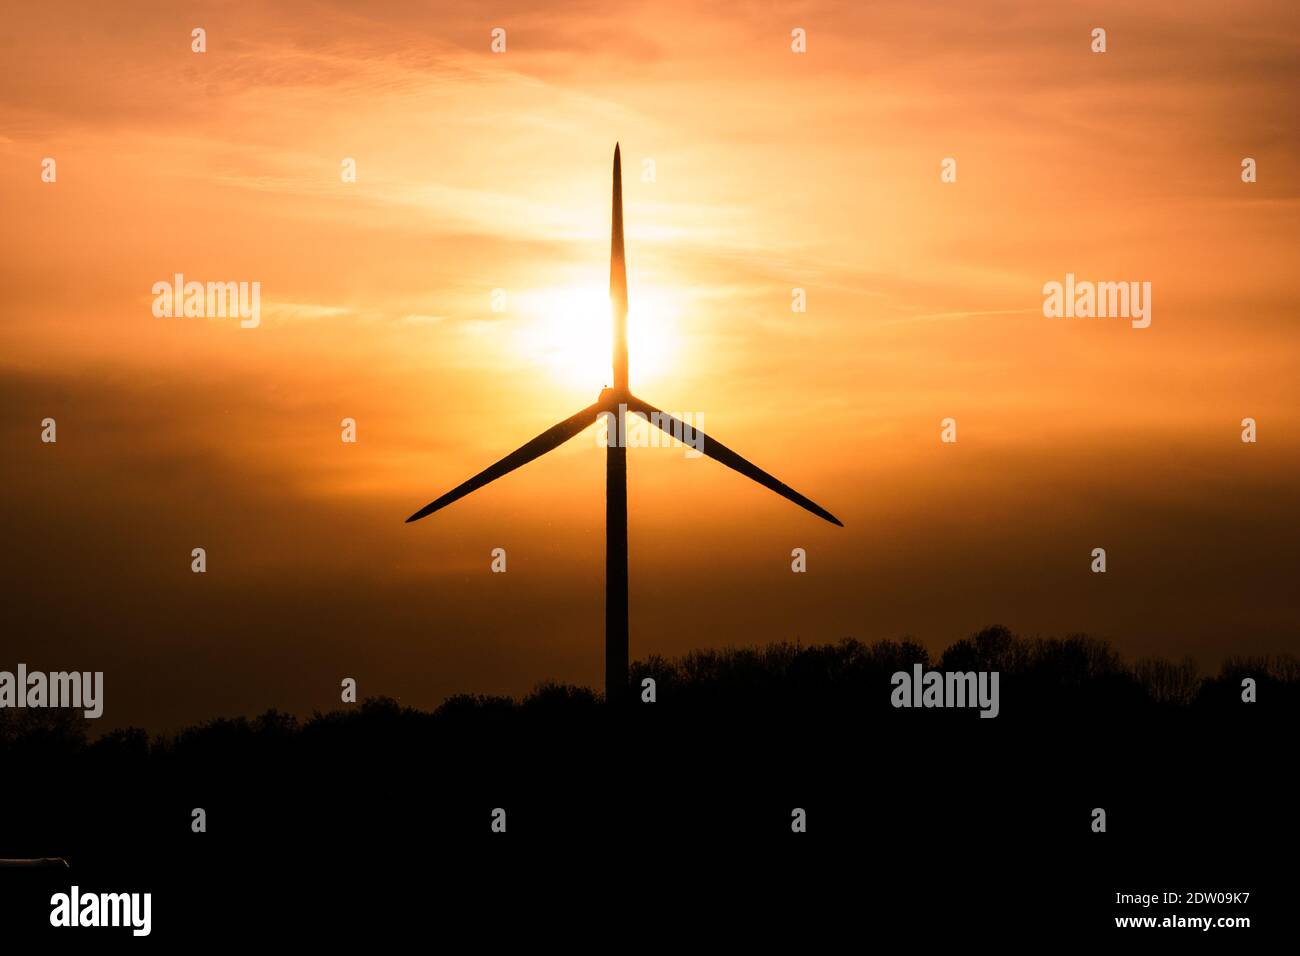 single wind turbine silhouettes at cloudy golden sunset Stock Photo